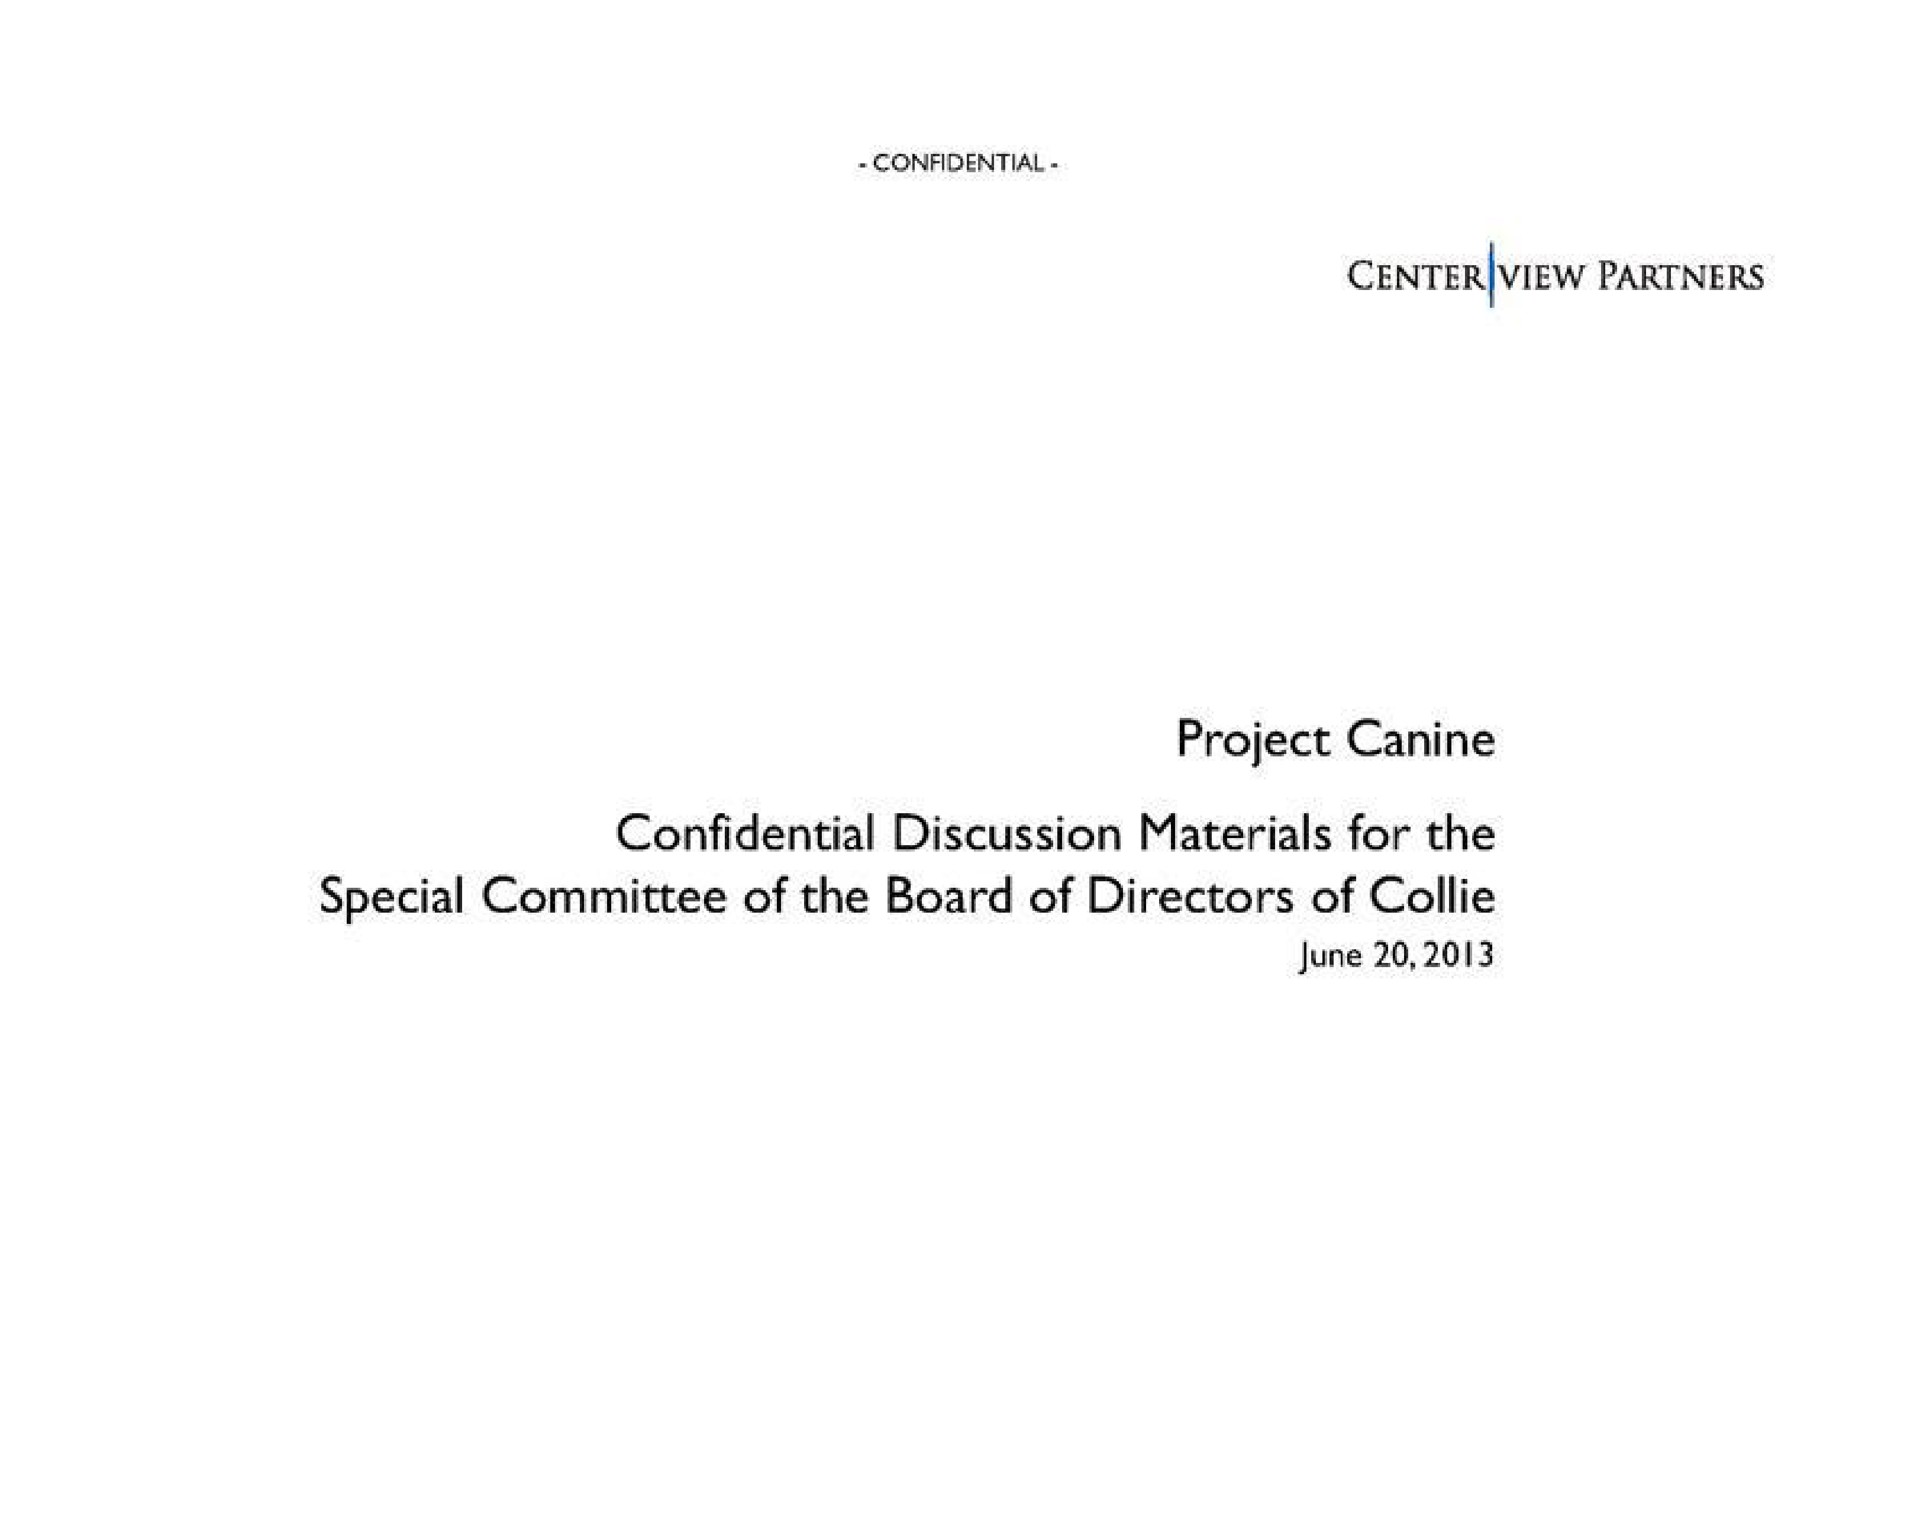 project canine confidential discussion materials for the special committee of the board of directors of collie | Centerview Partners